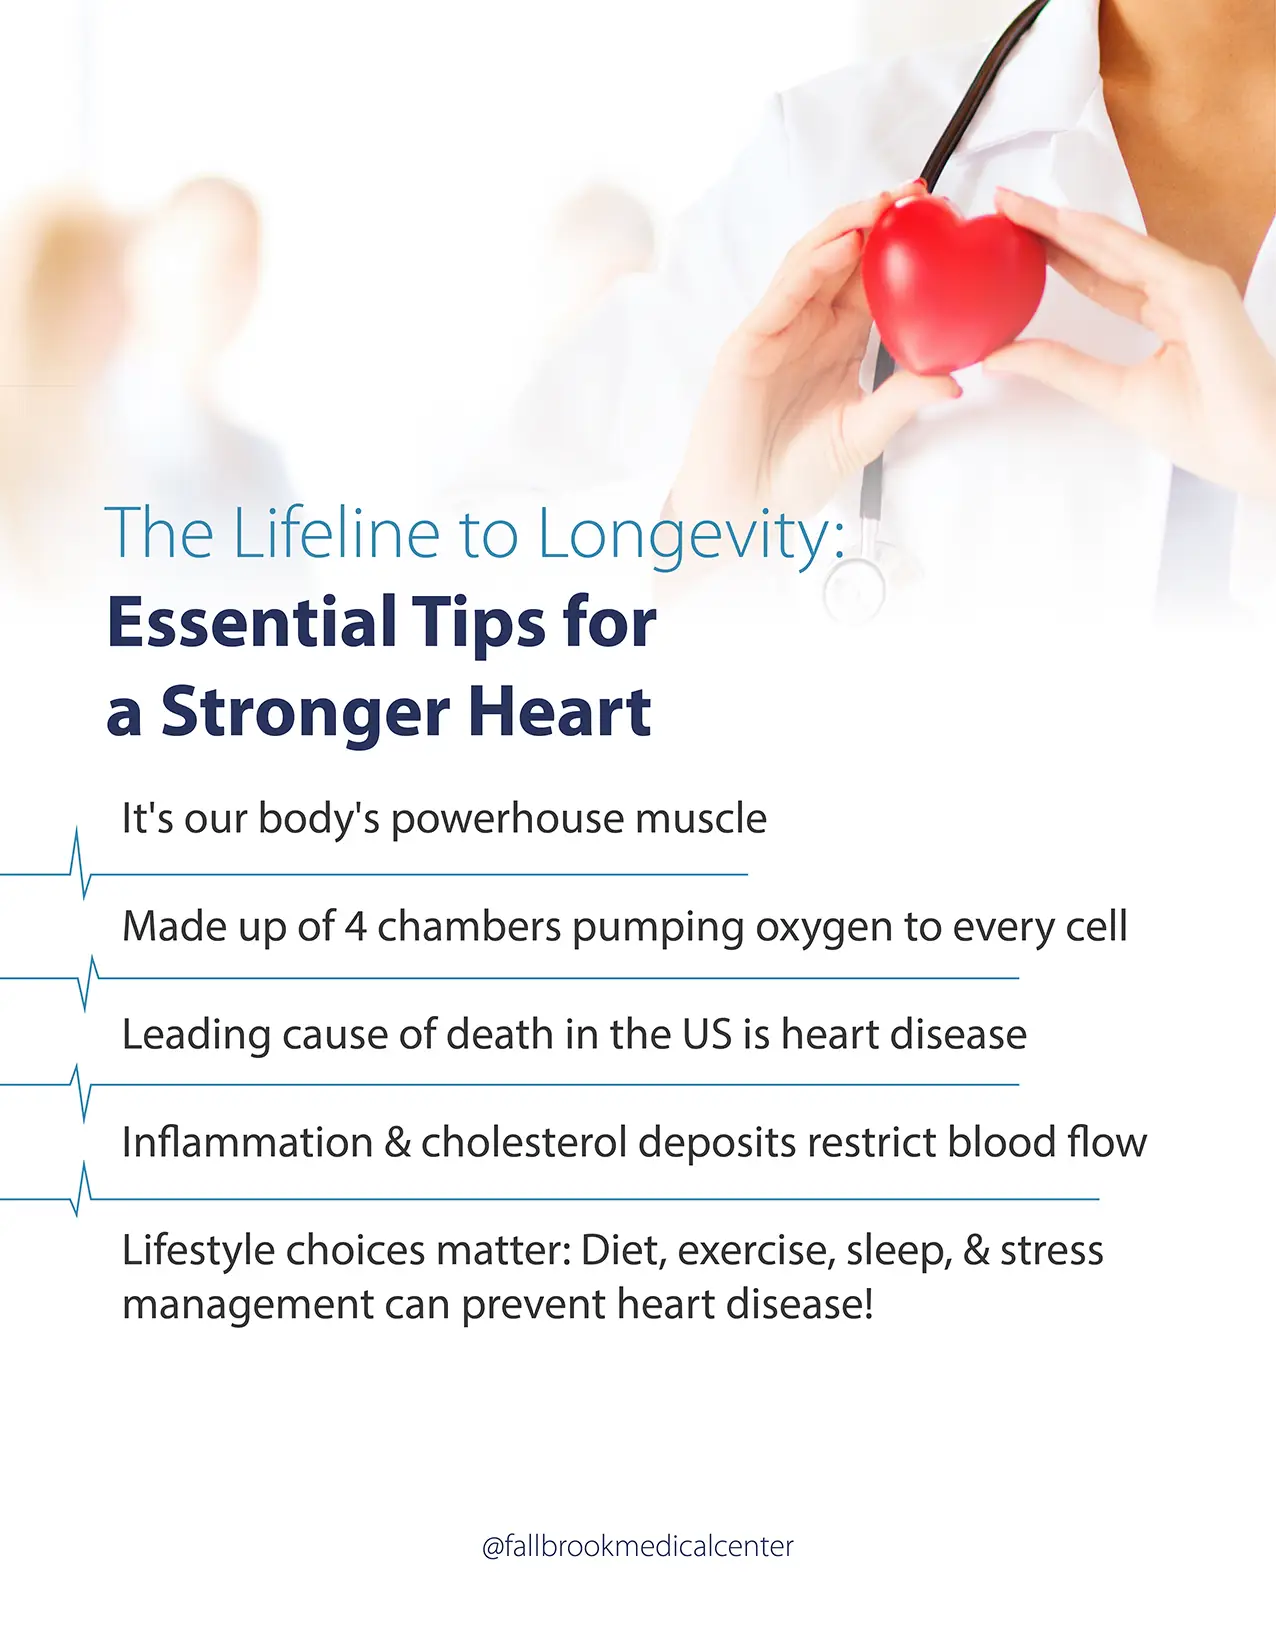 The Lifeline to Longevity Essential Tips for a Stronger Heart